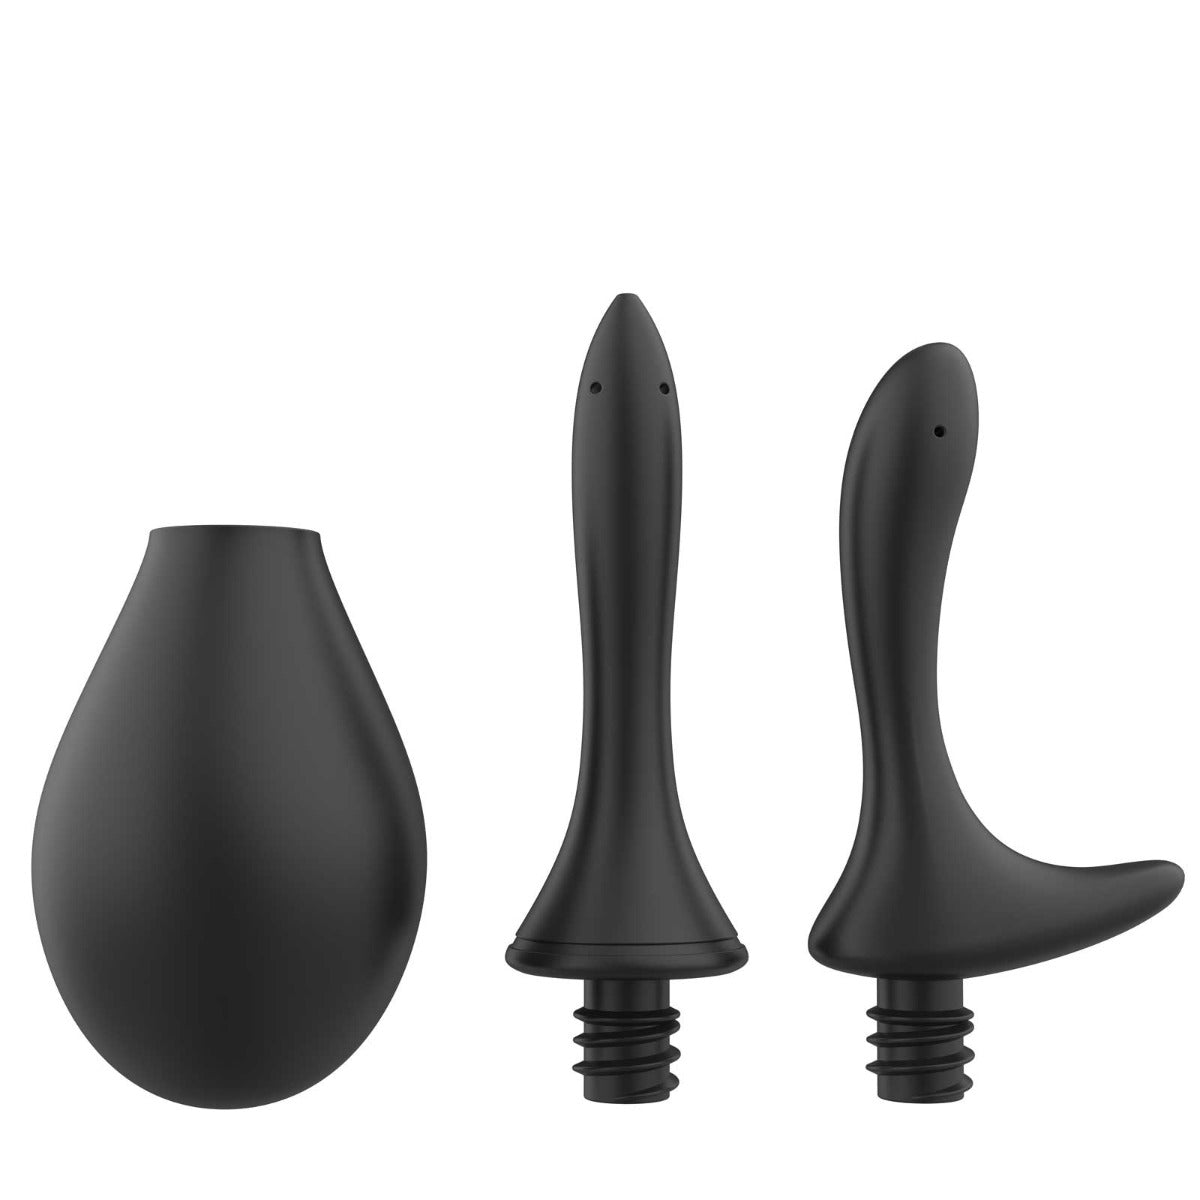 Douches Nexus Douche Set 260ml Anal Douche with Silicone Tips x 2   